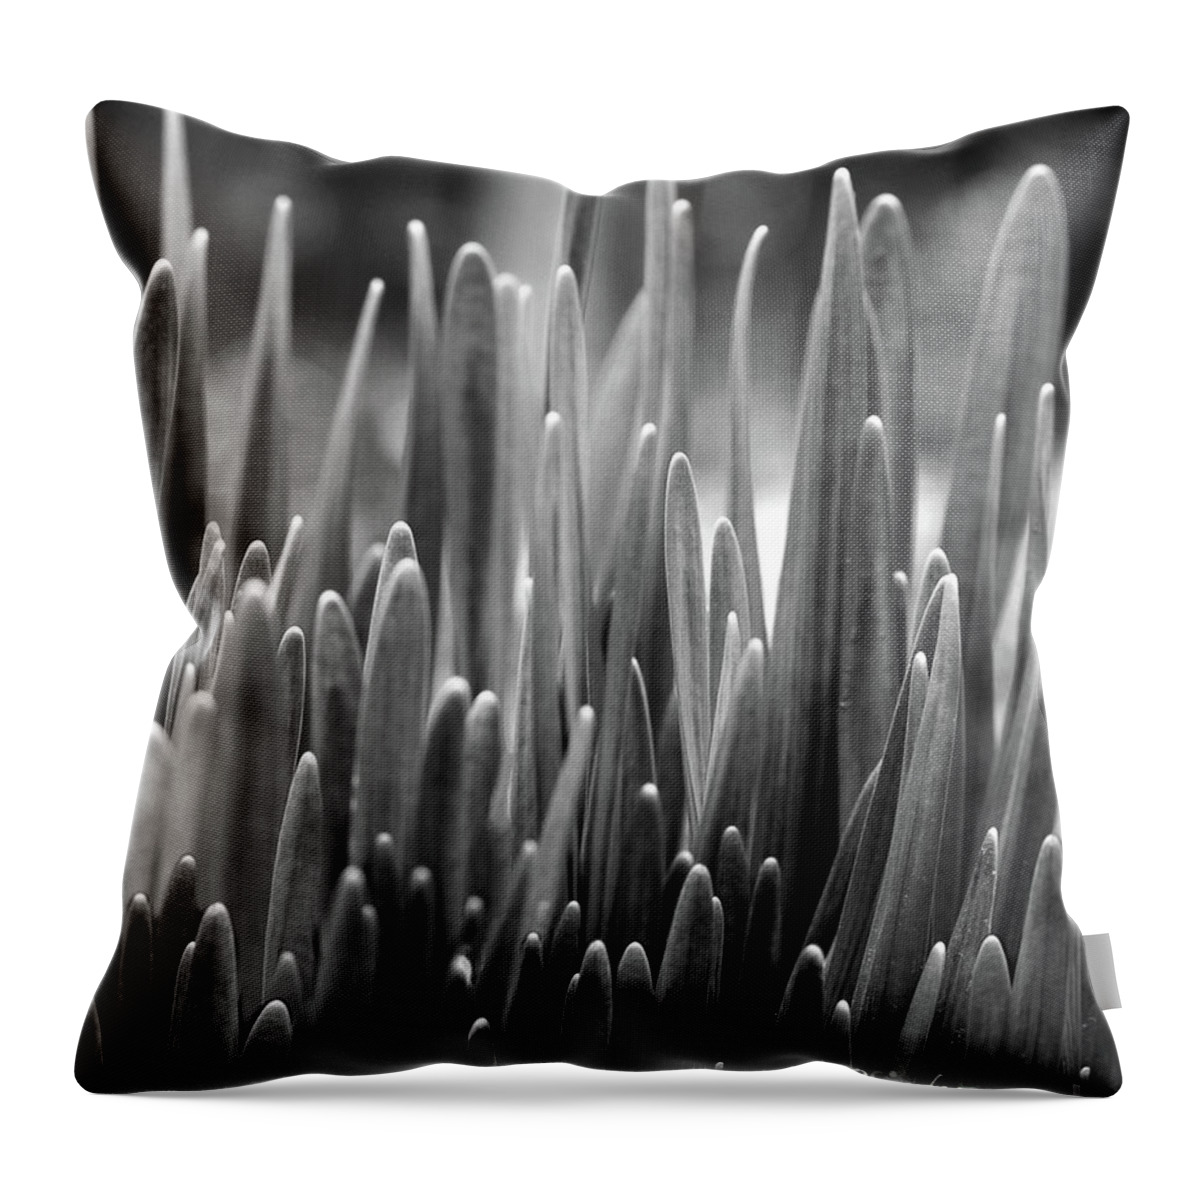 Daffodil Shoots Bw Throw Pillow featuring the photograph Daffodil Shoots by Natalie Dowty